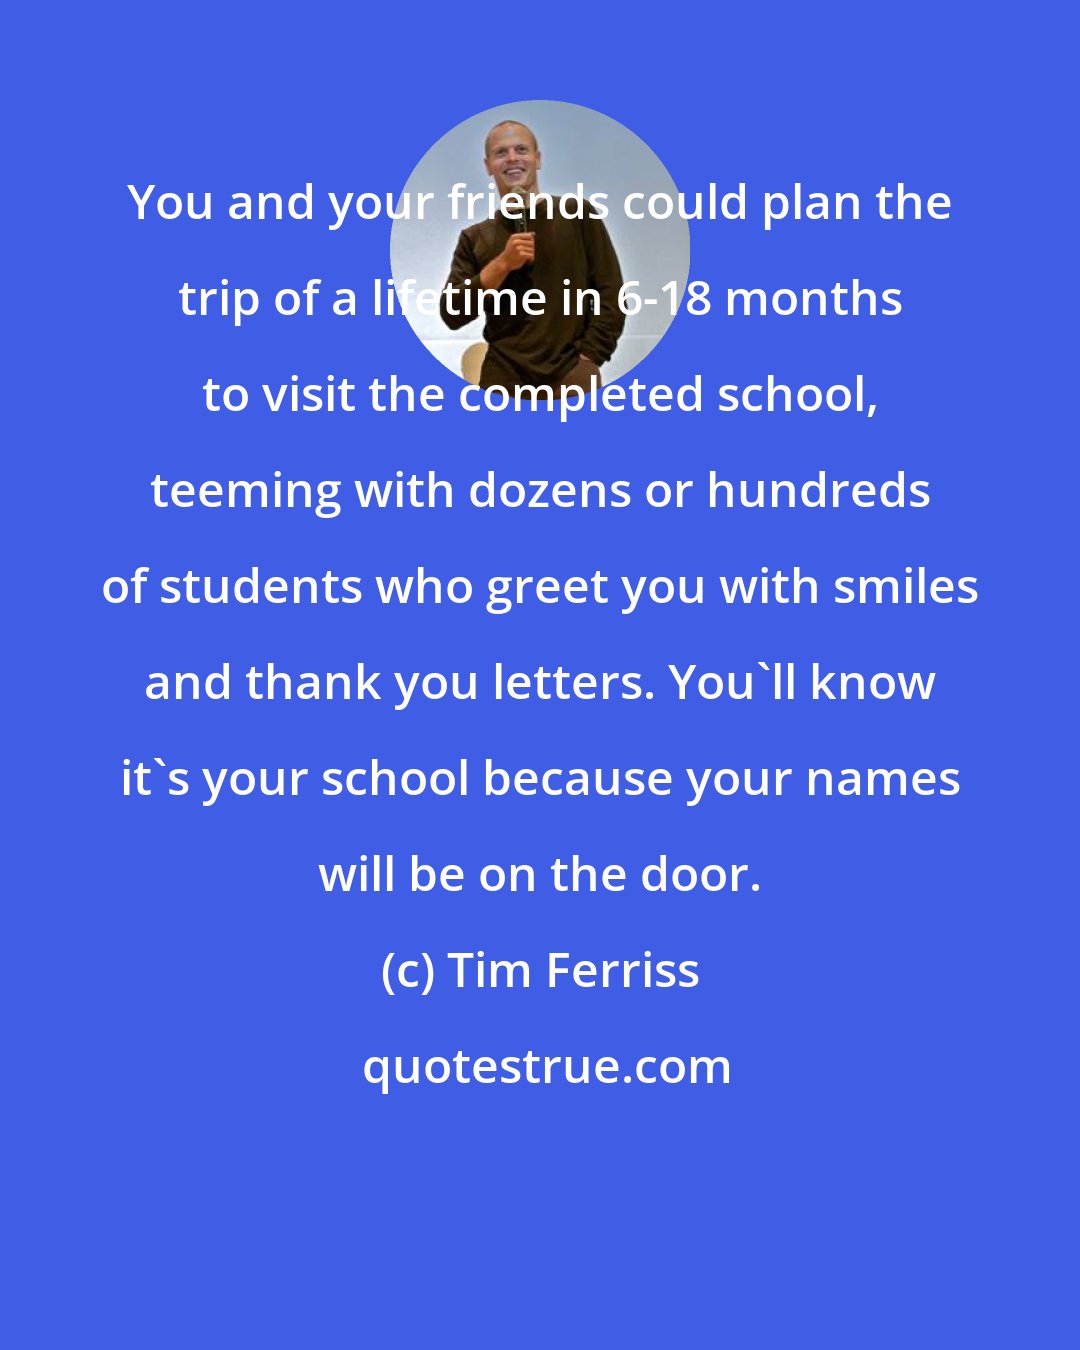 Tim Ferriss: You and your friends could plan the trip of a lifetime in 6-18 months to visit the completed school, teeming with dozens or hundreds of students who greet you with smiles and thank you letters. You'll know it's your school because your names will be on the door.